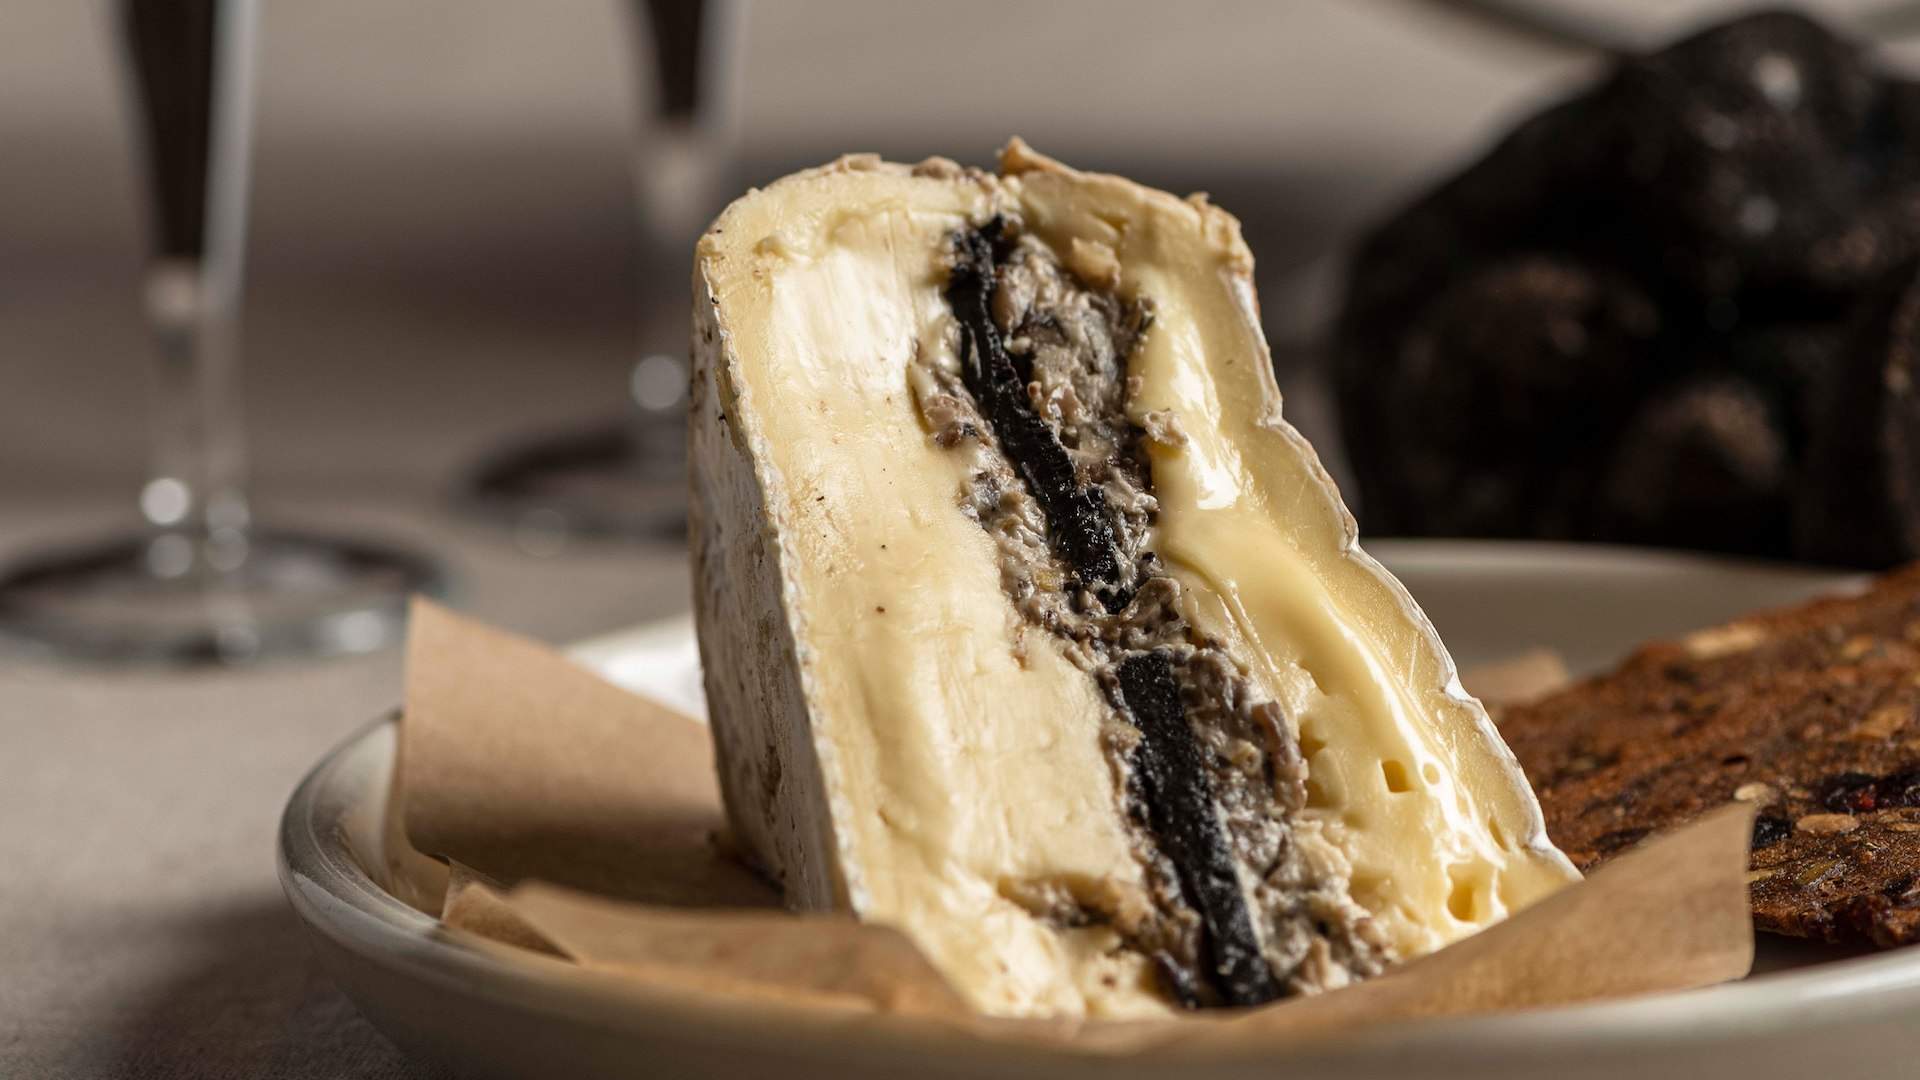 High Cheese at The Westin — Truffle Takeover Edition